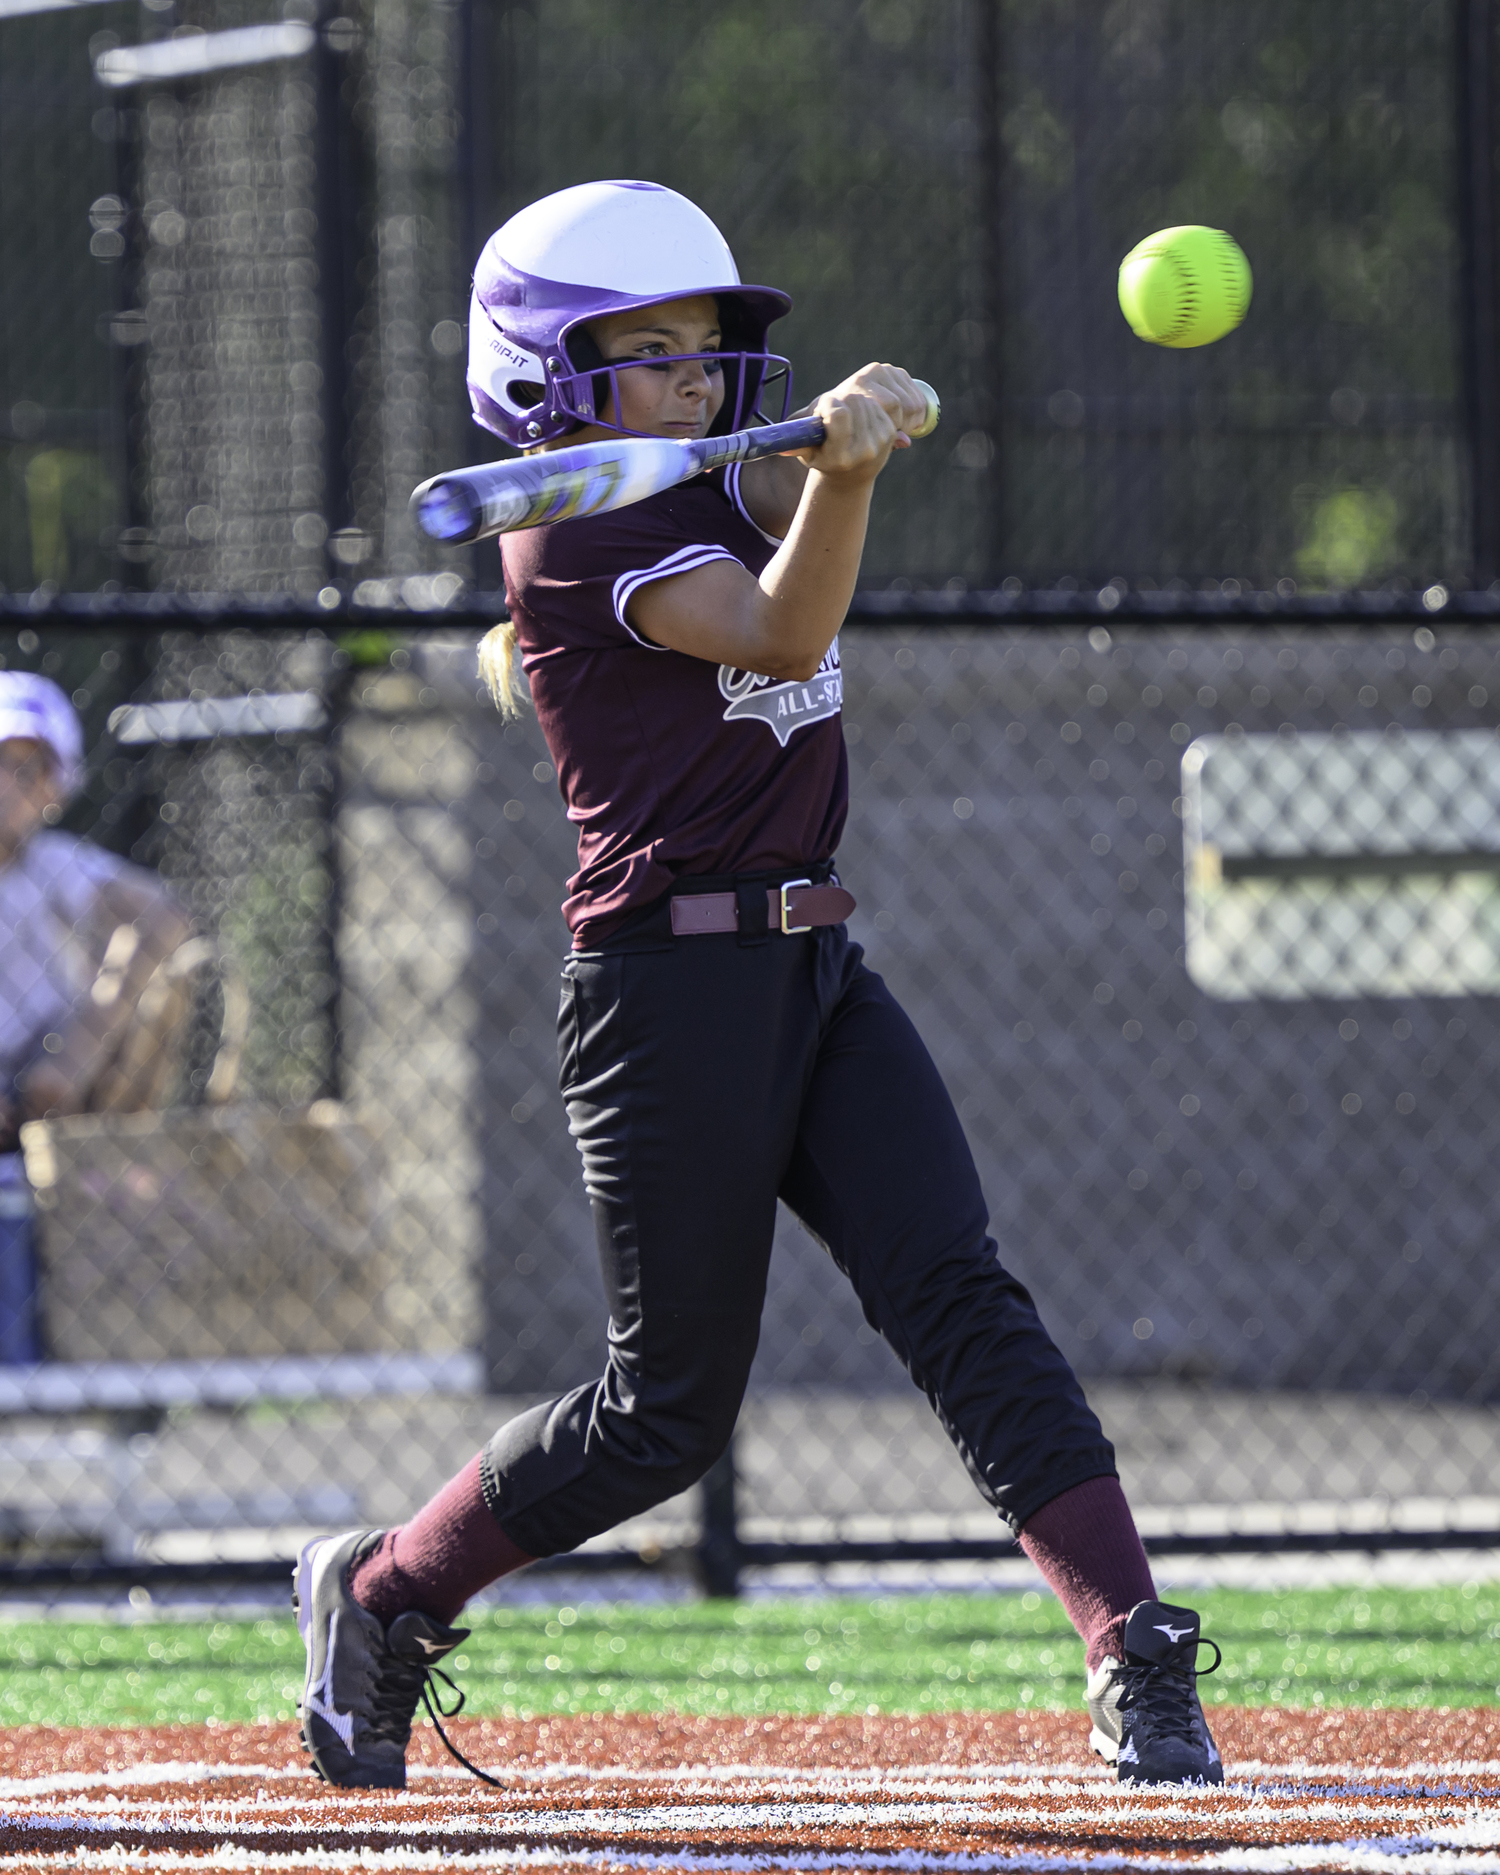 Mia Coppola keeps her eye on the ball as a pitch comes in. MARIANNE BARNETT